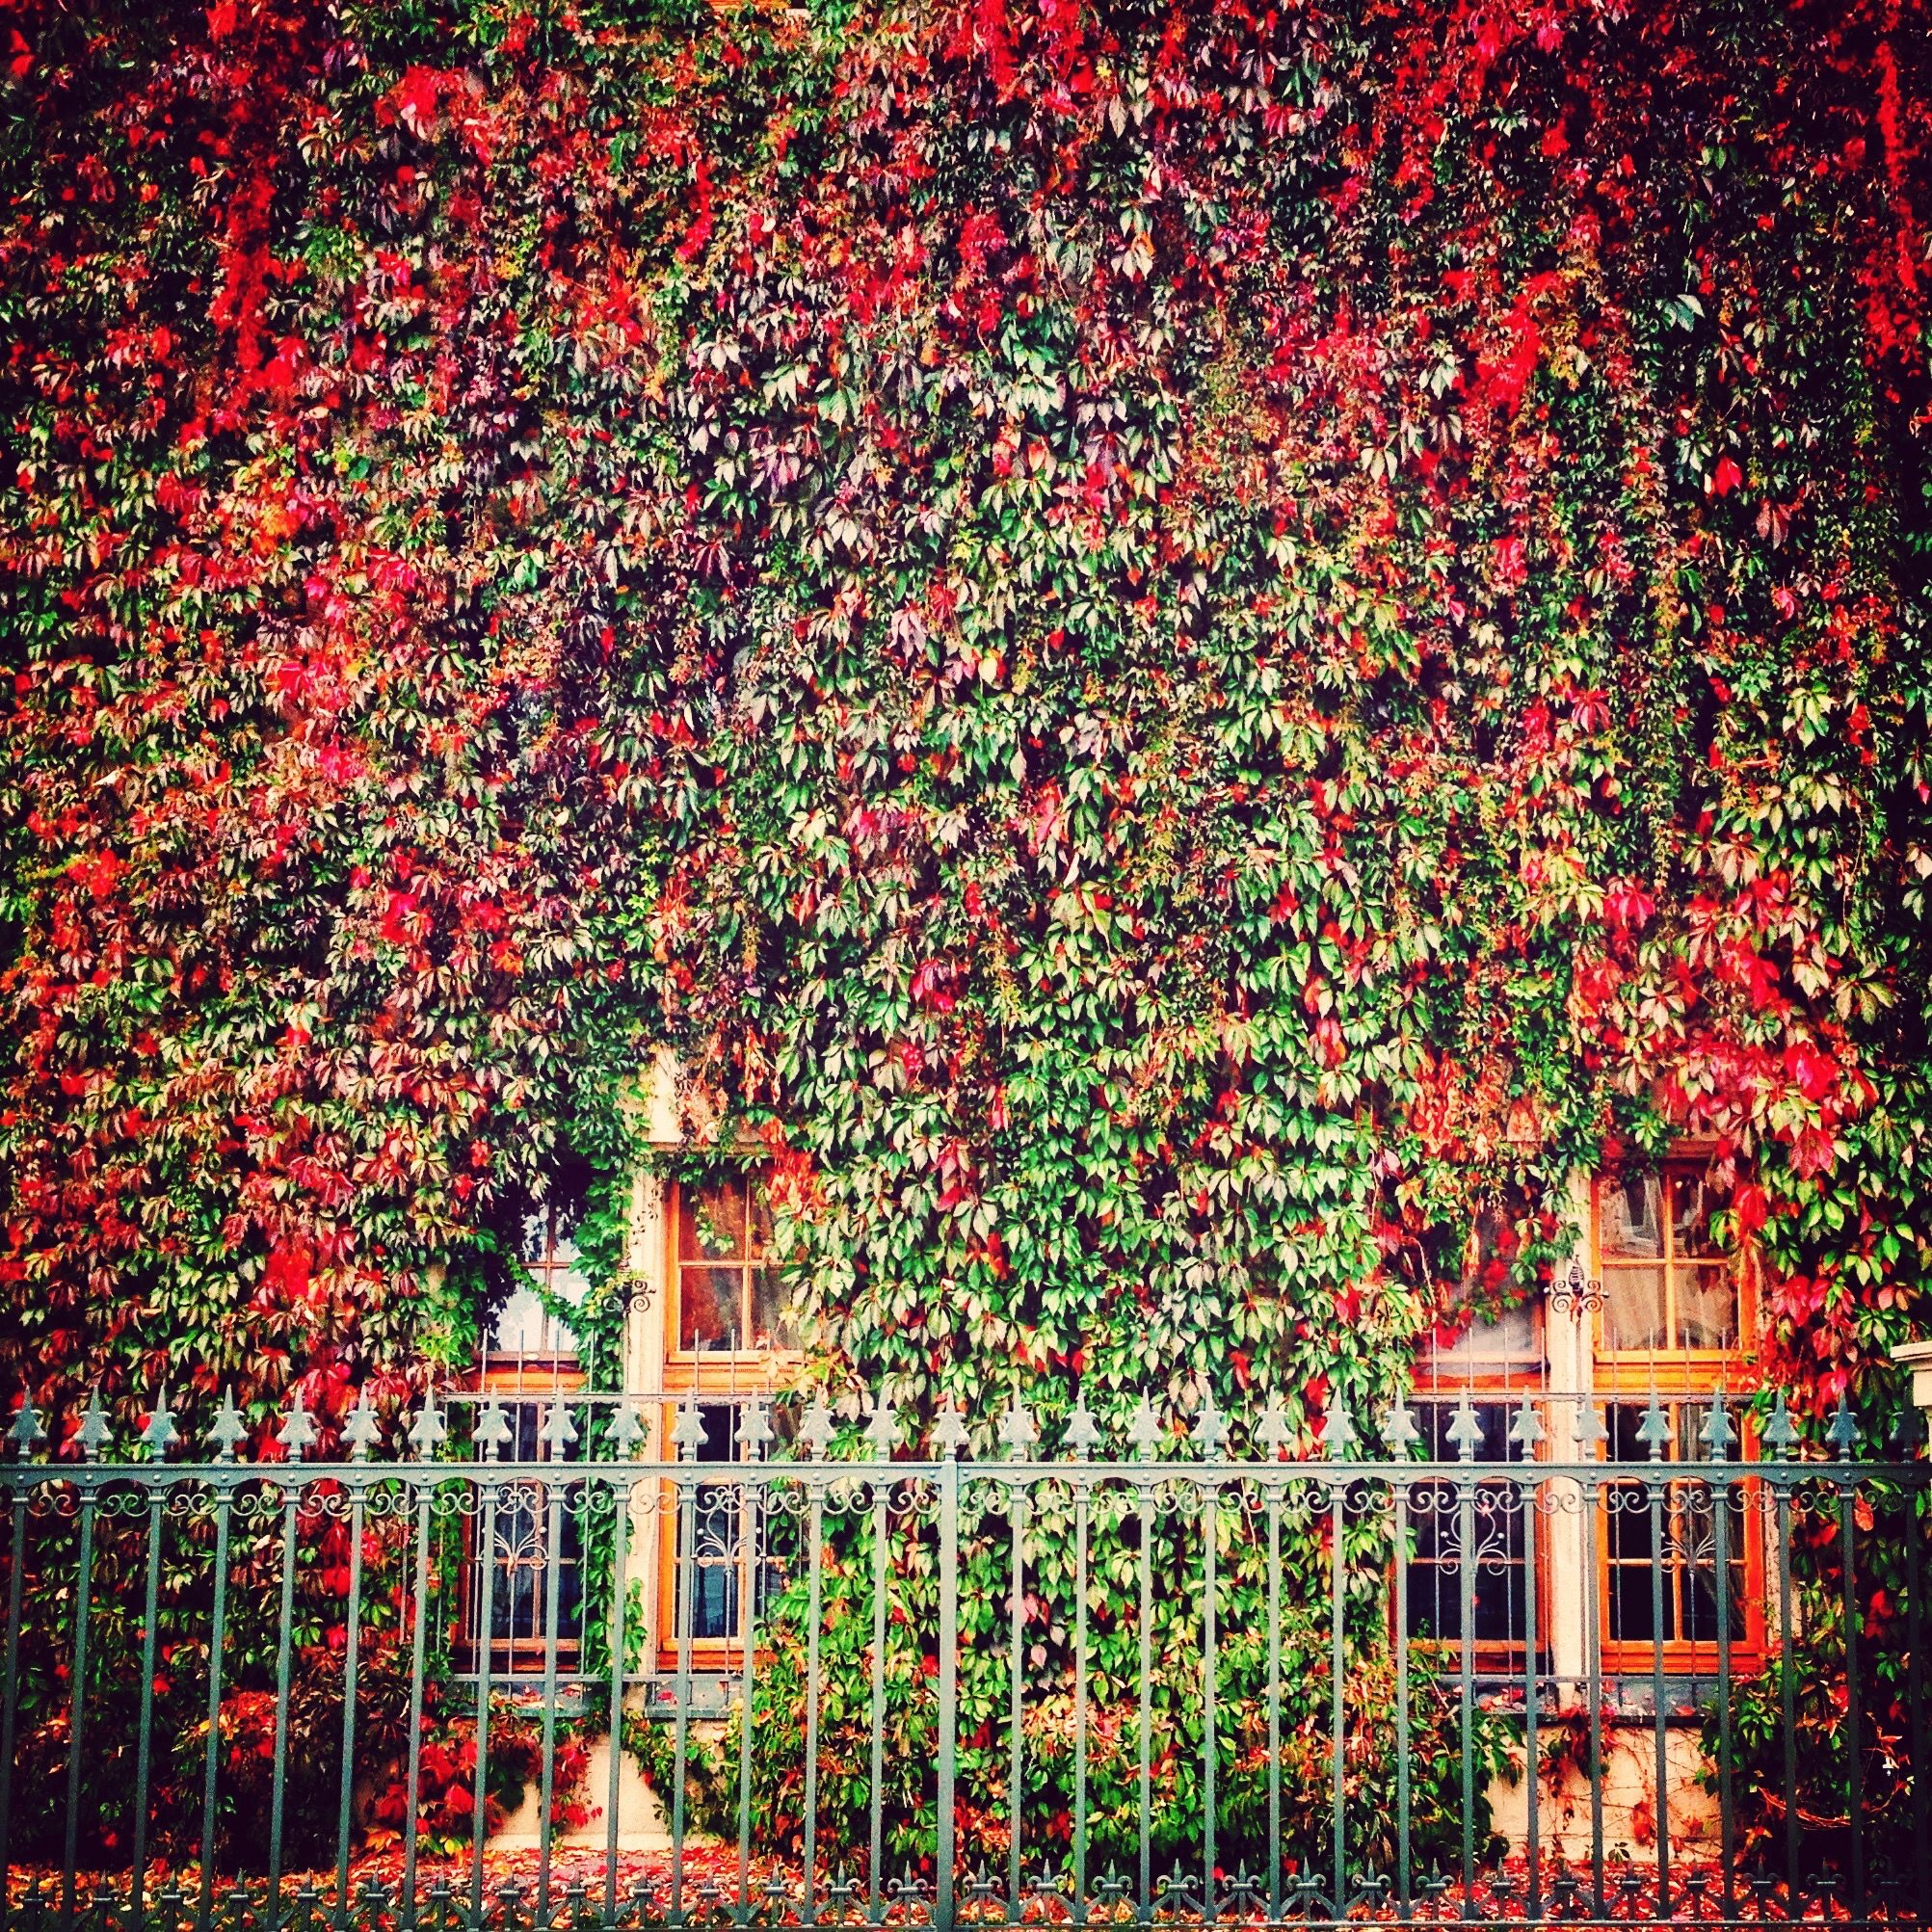 building exterior, architecture, built structure, growth, house, tree, red, window, plant, residential structure, branch, residential building, nature, season, autumn, ivy, outdoors, beauty in nature, flower, no people